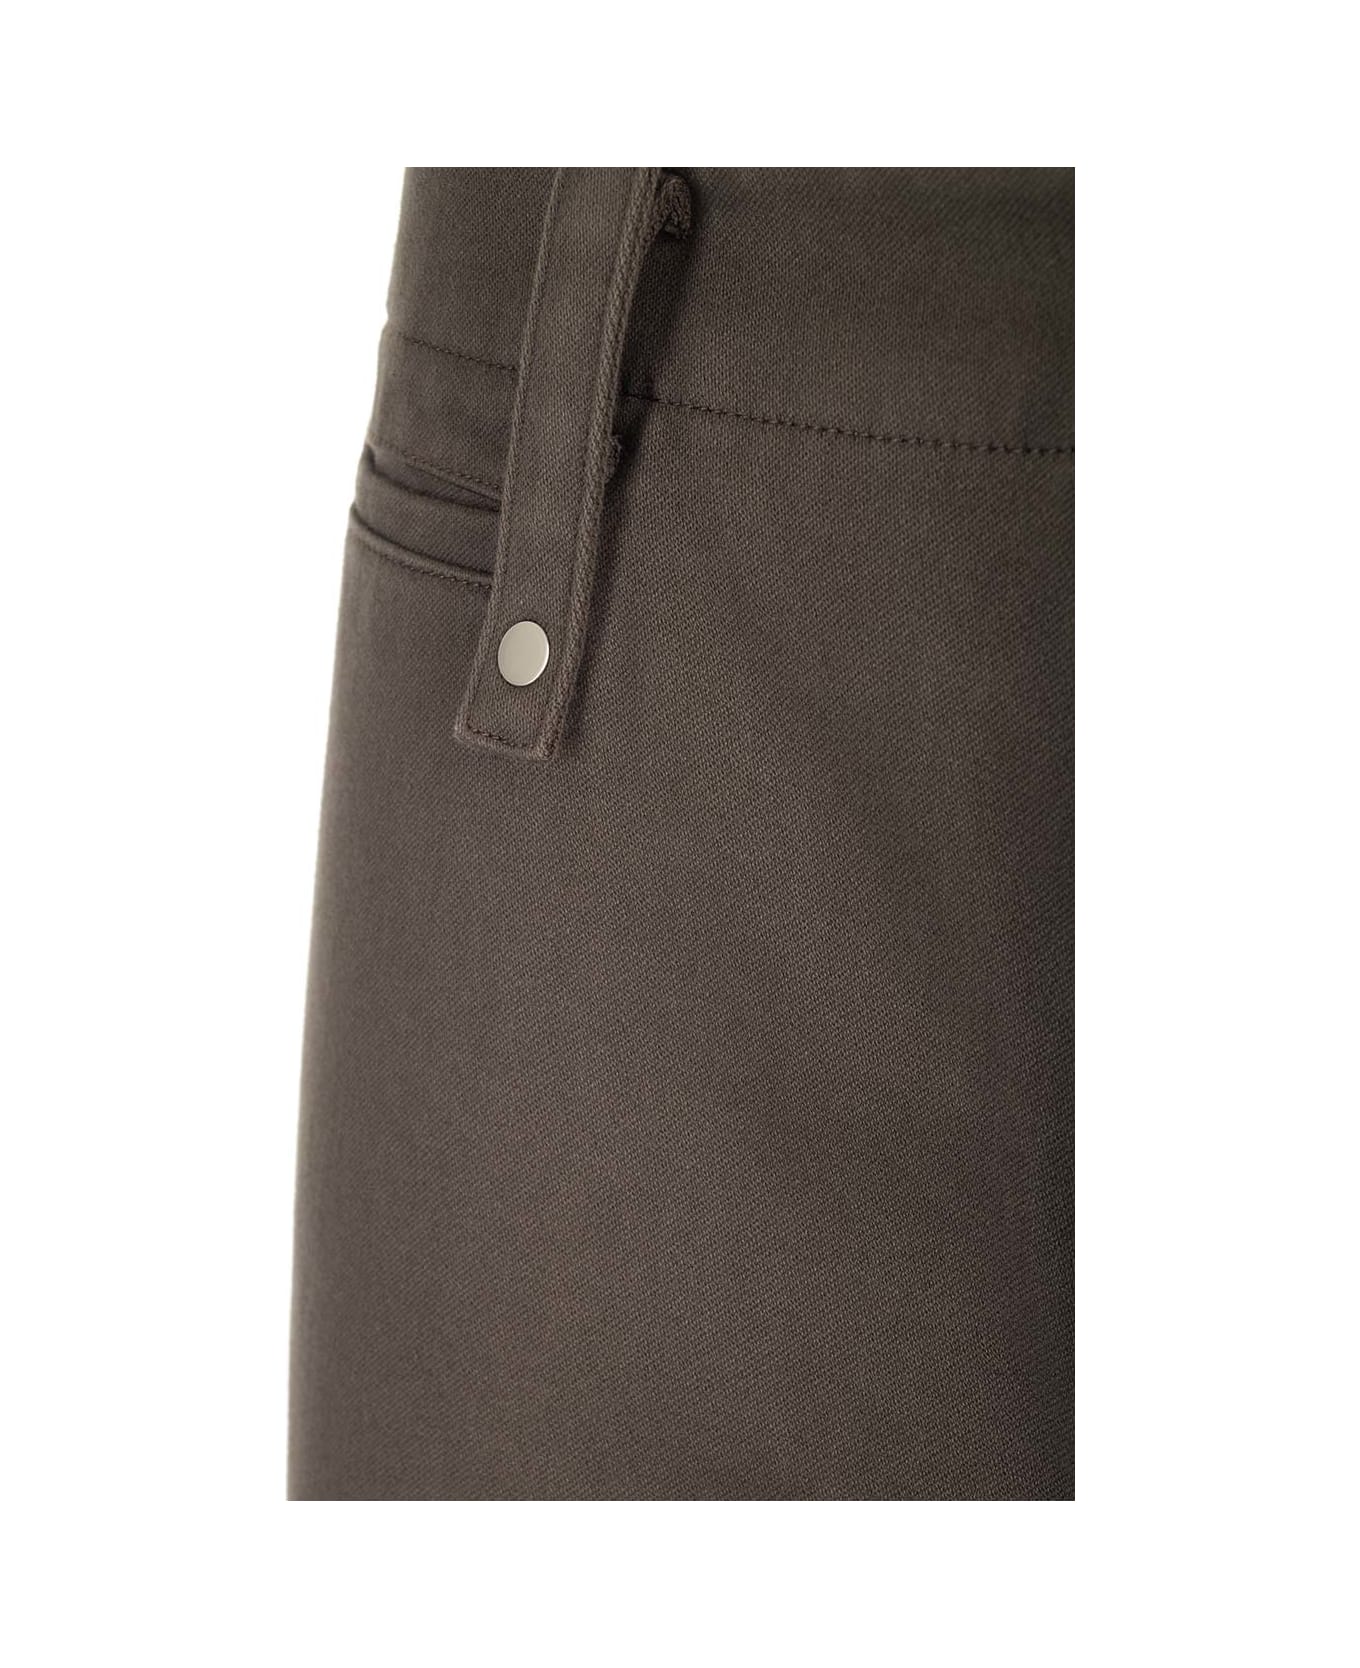 Burberry Straight Leg Trousers - Brown